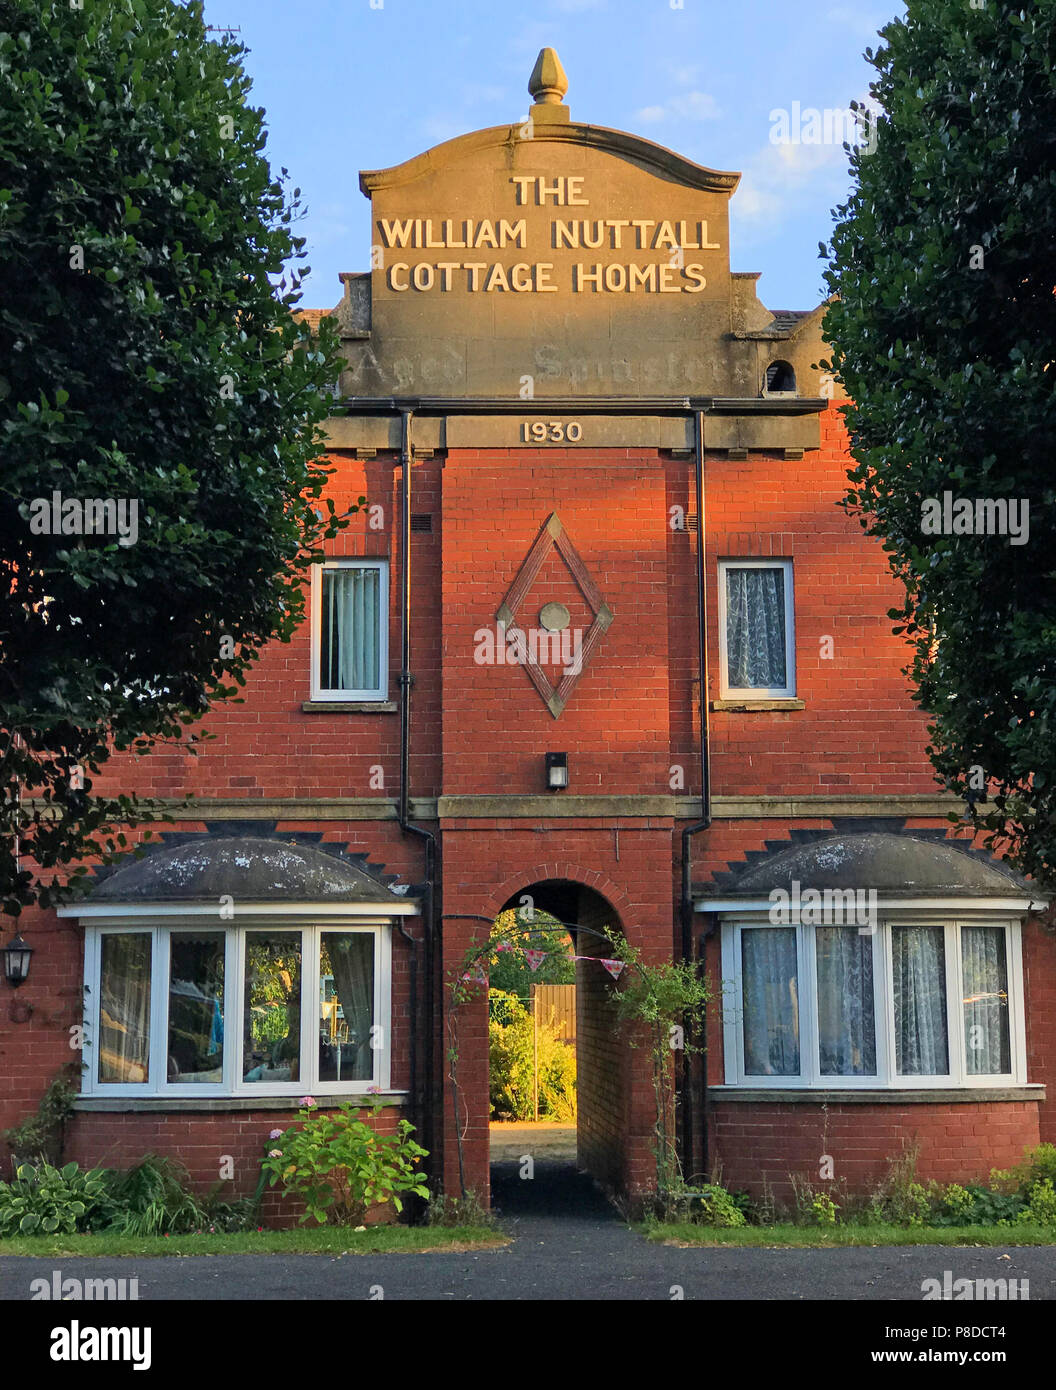 The William Nuttall Cottage Homes conservation area, 1930, William Nuttall Trust, Bennetthorp Almshouses, Doncaster, Yorkshire, England, UK Stock Photo